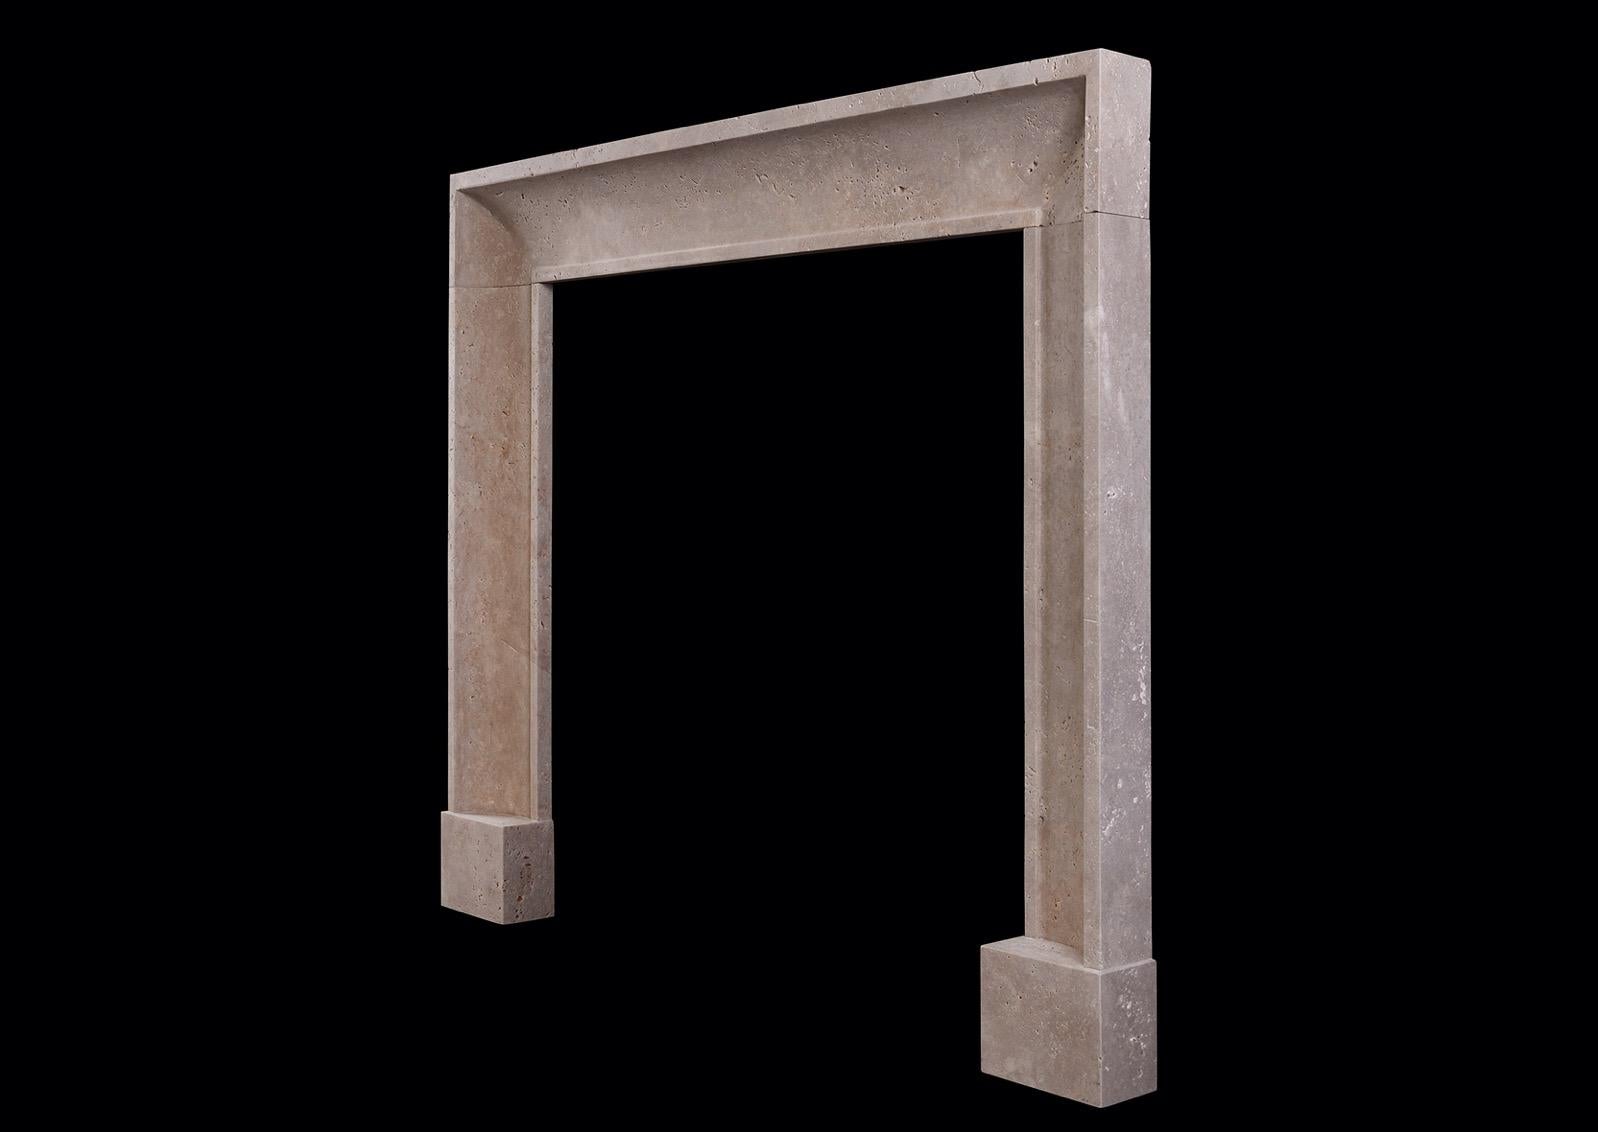 English A Small Architectural Fireplace in Travertine Stone For Sale